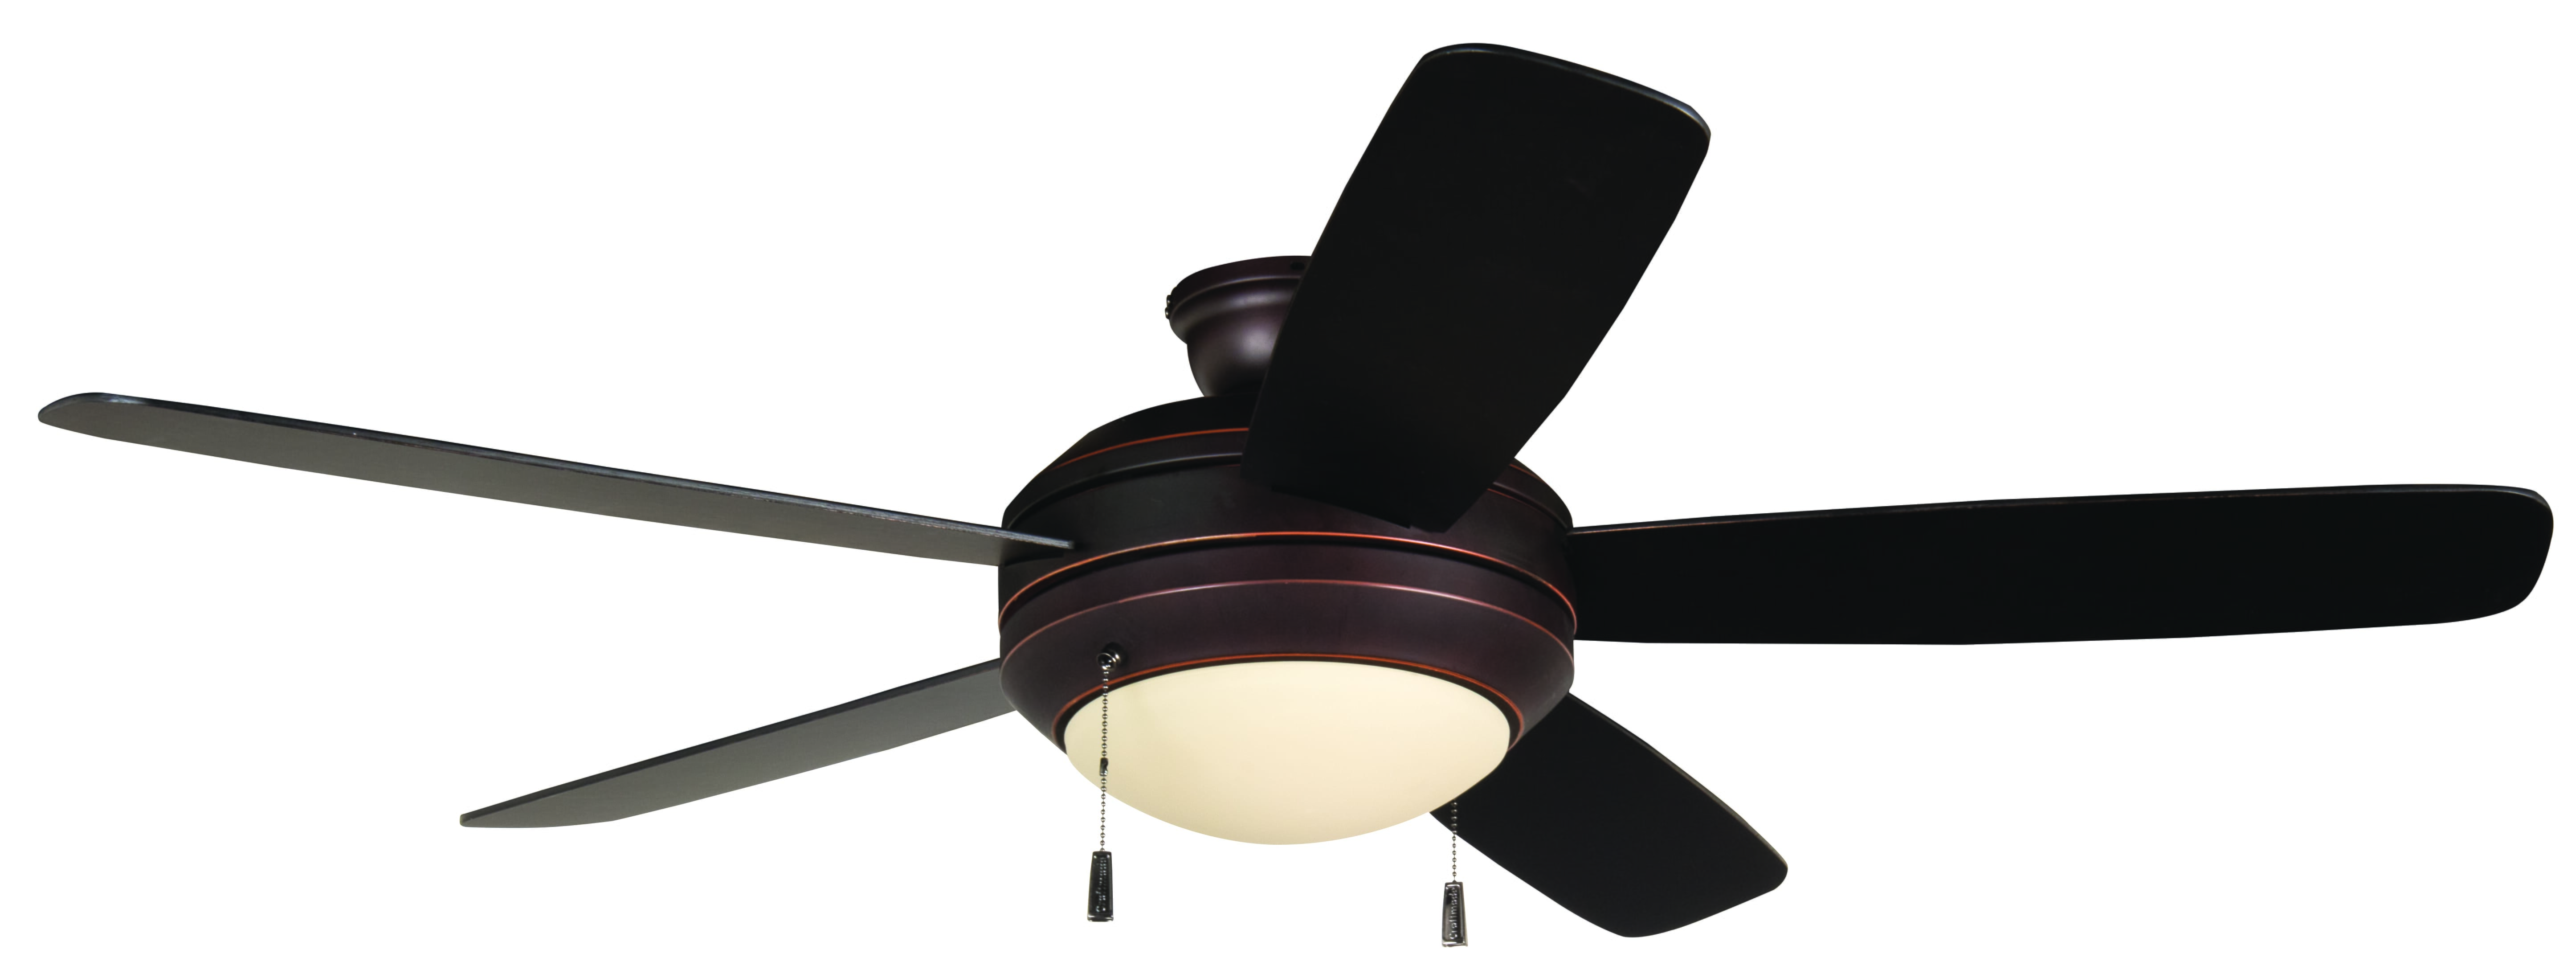 Craftmade 52"" Helios Ceiling Fan in Oiled Bronze Gilded -  HE52OBG5-LED